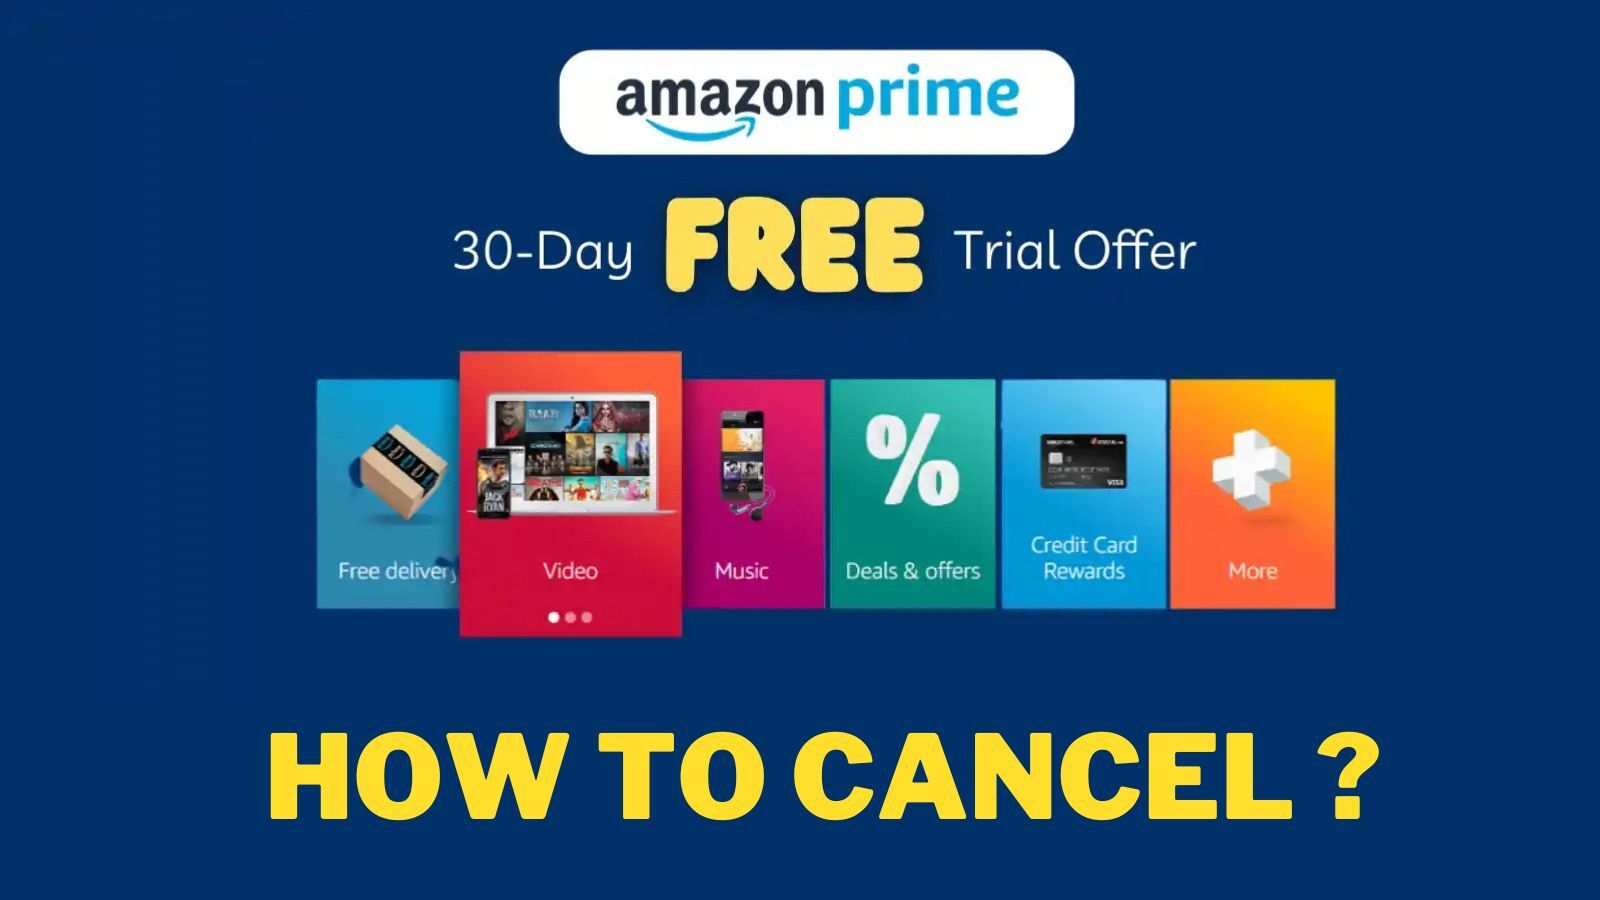 How To Cancel Amazon Prime Free Trial (Step-by-Step Guide to Different Devices)